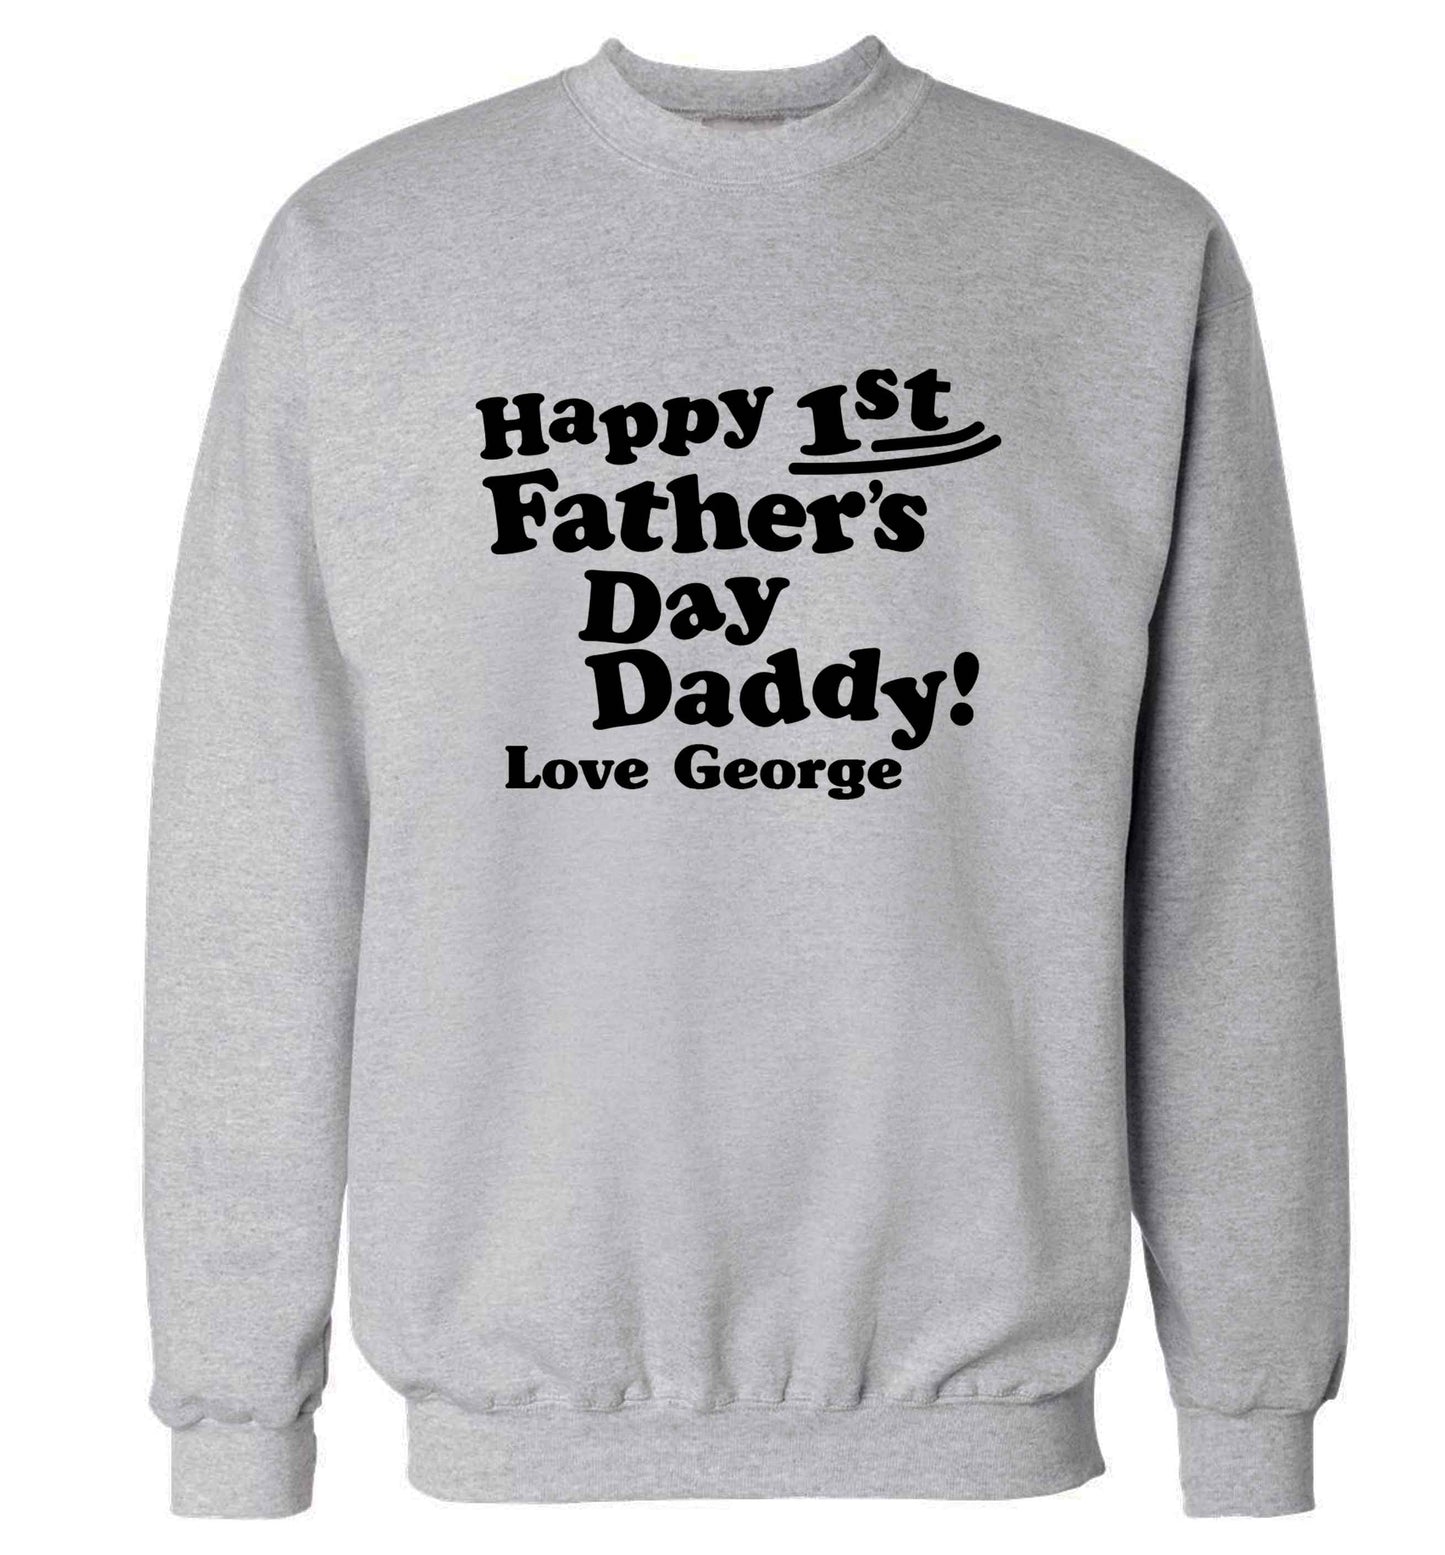 Happy first Fathers Day daddy love personalised adult's unisex grey sweater 2XL